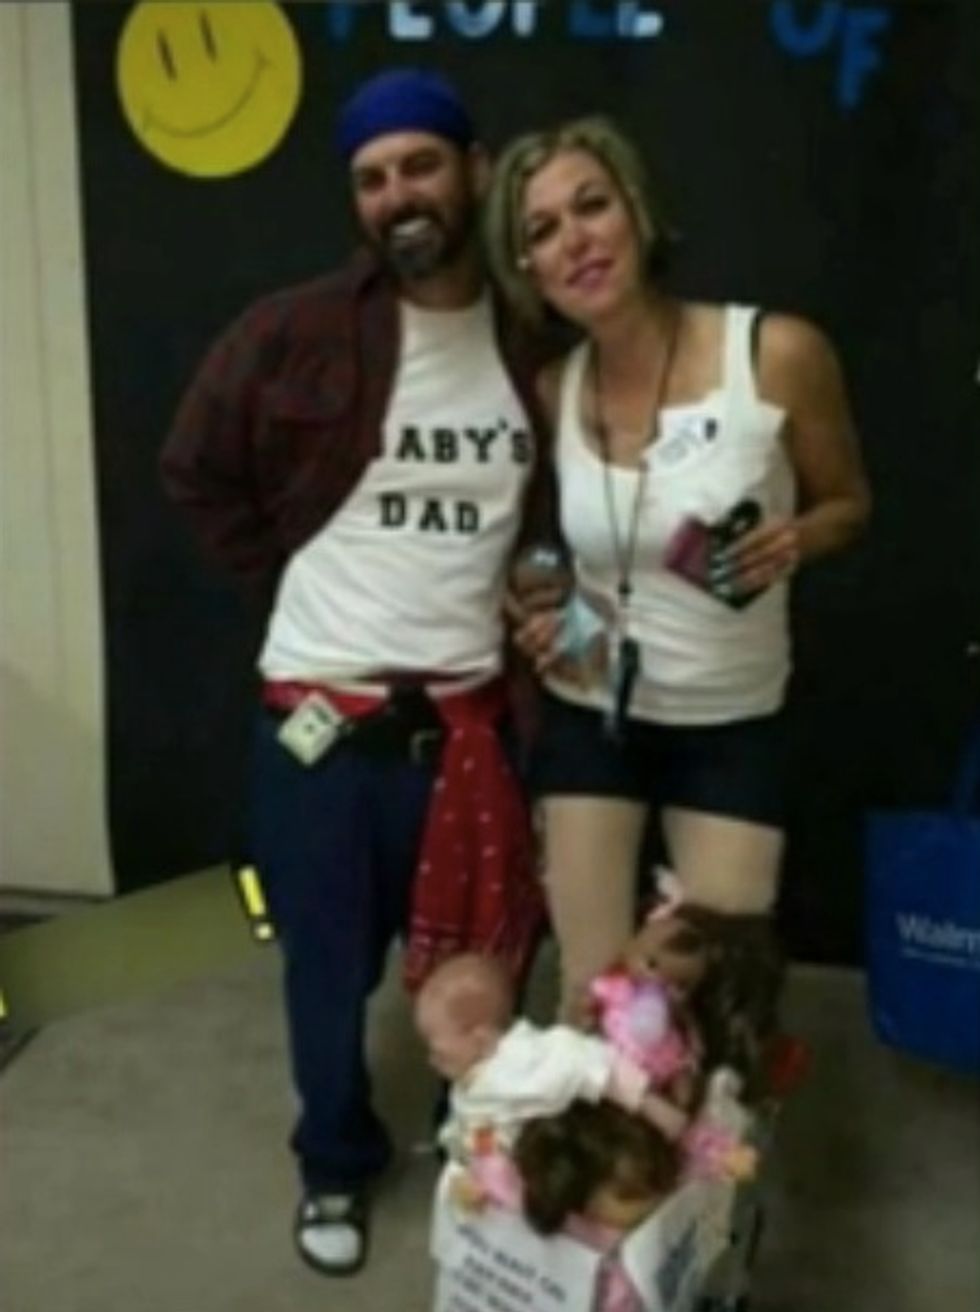 Public School Educators Photographed at Costume Party Allegedly Dressed as 'People of Walmart' — and Not Everyone Is Amused